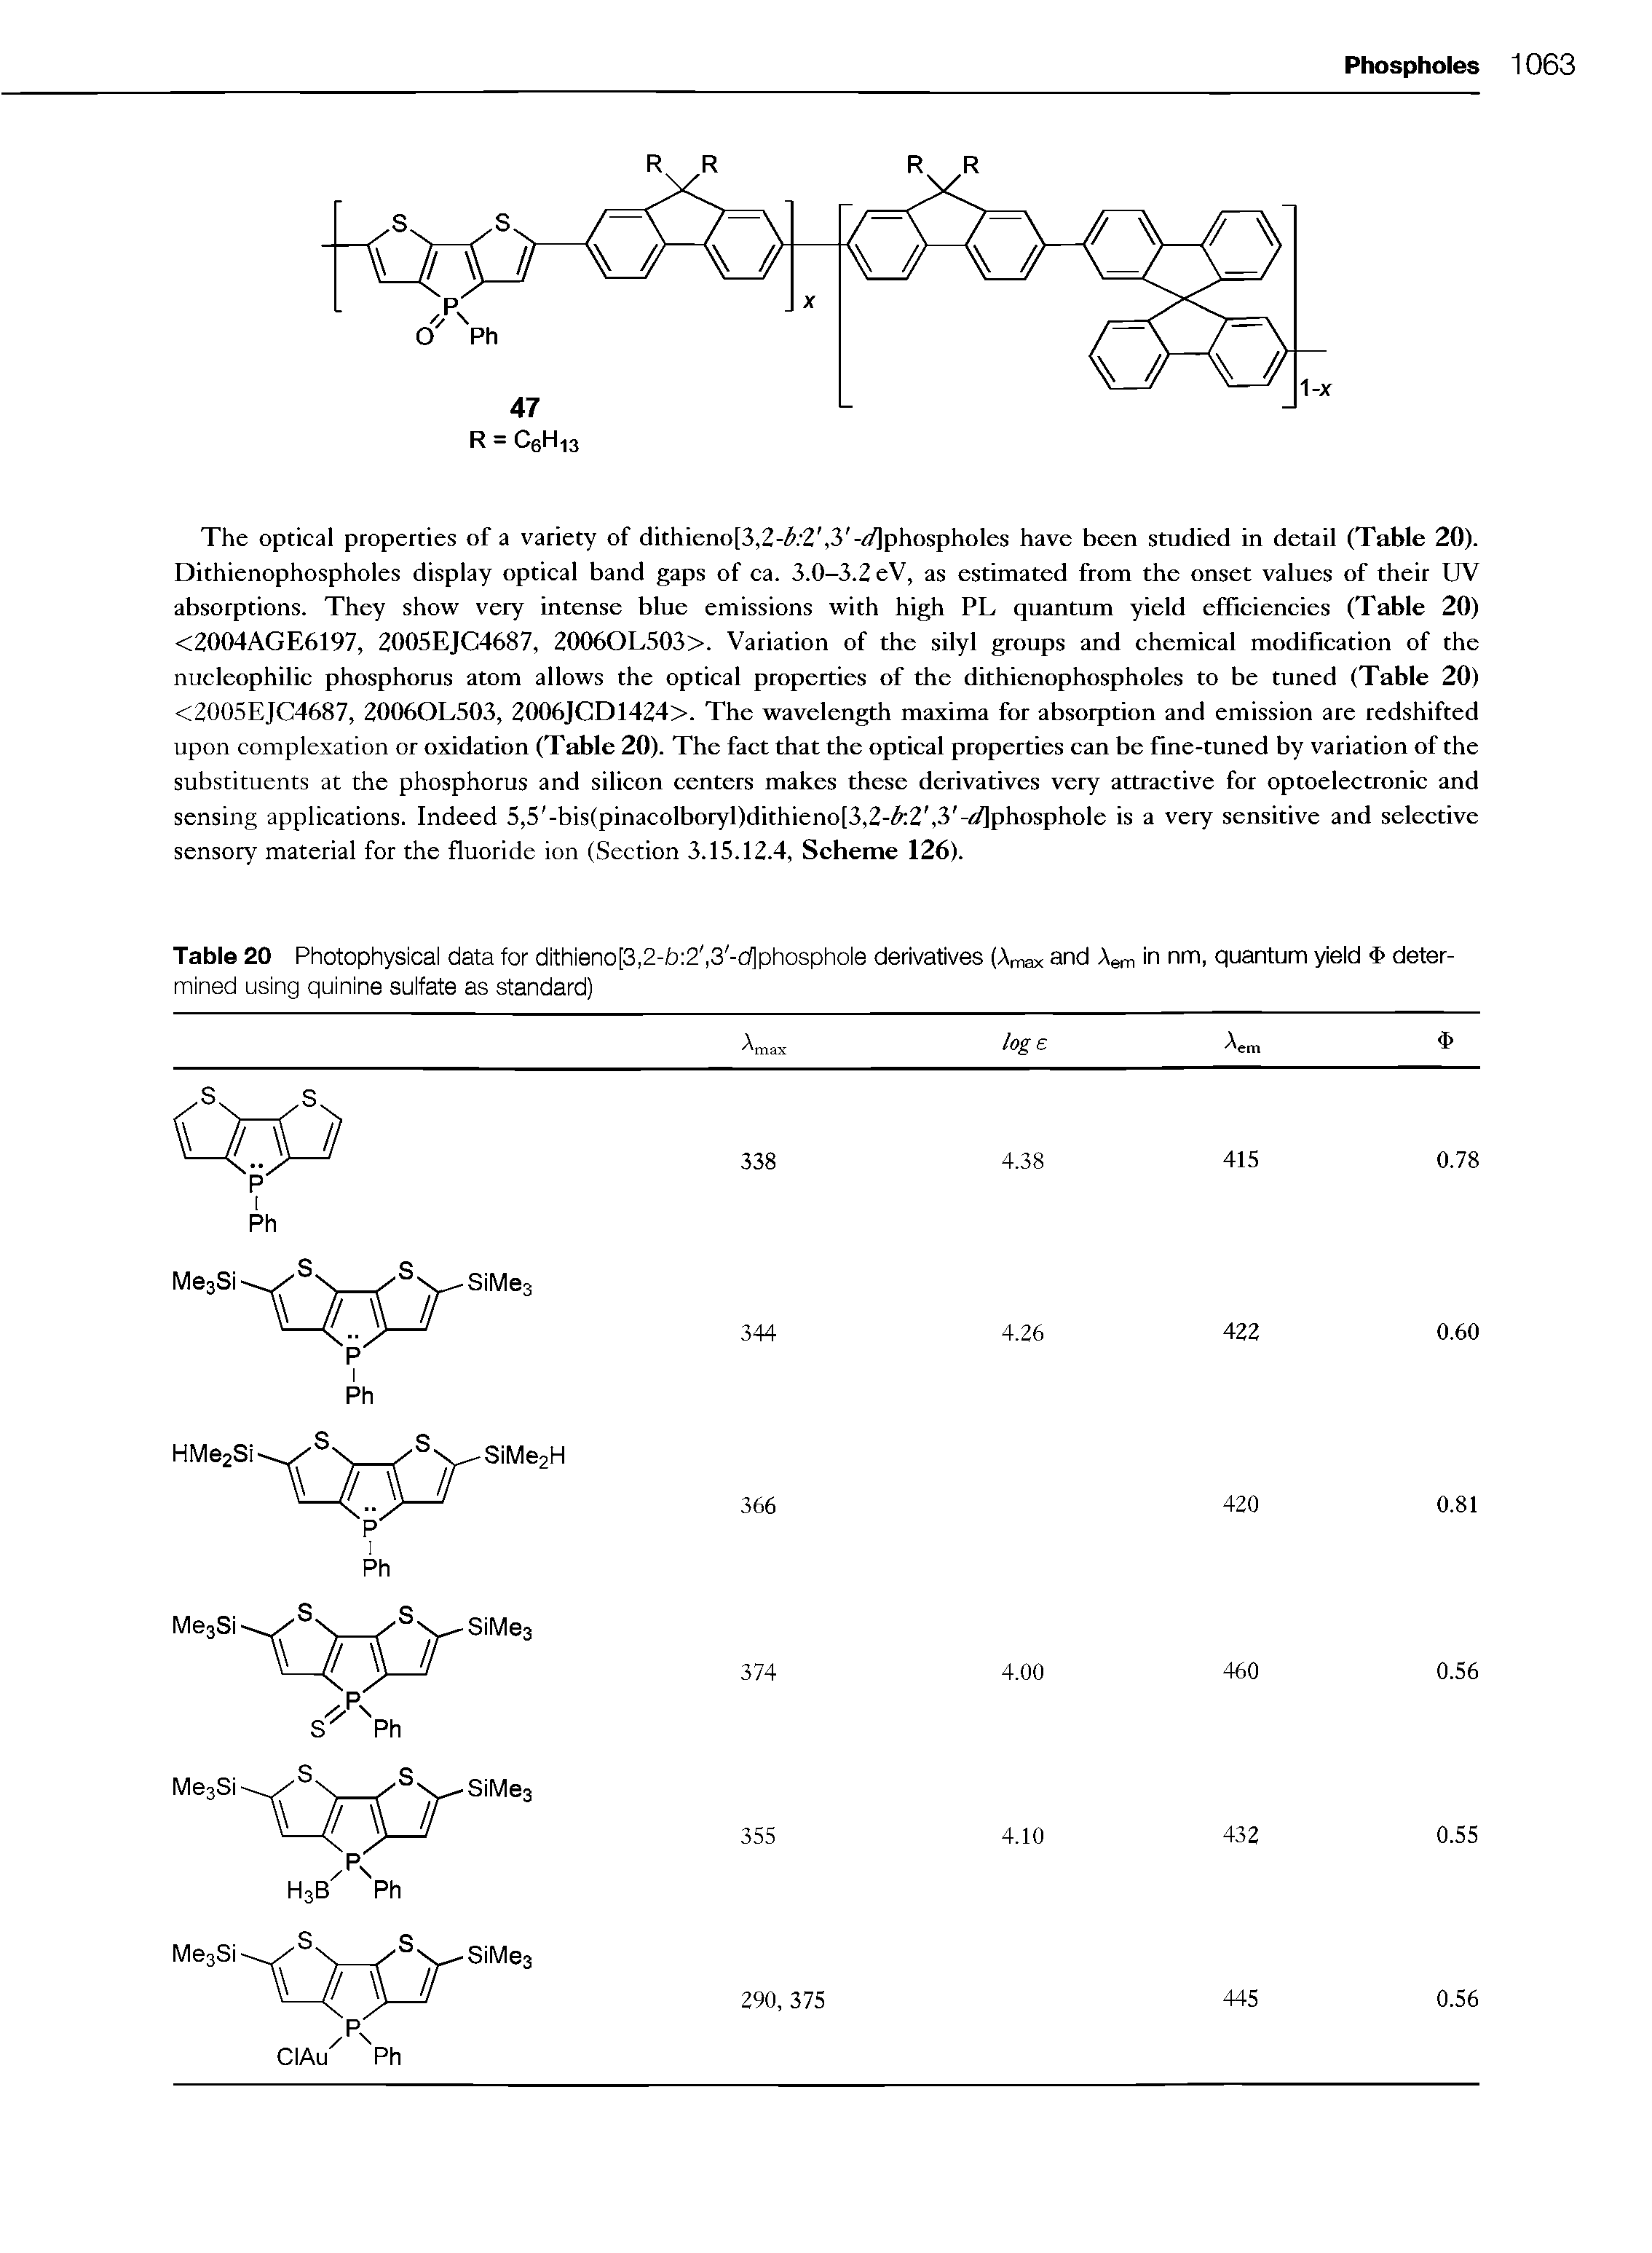 Table 20 Photophysical data for dithieno[3,2-fa 2, 3 -d]phosphole derivatives (Amax and Aem in nm, quantum yieid <1> determined using quinine sulfate as standard)...